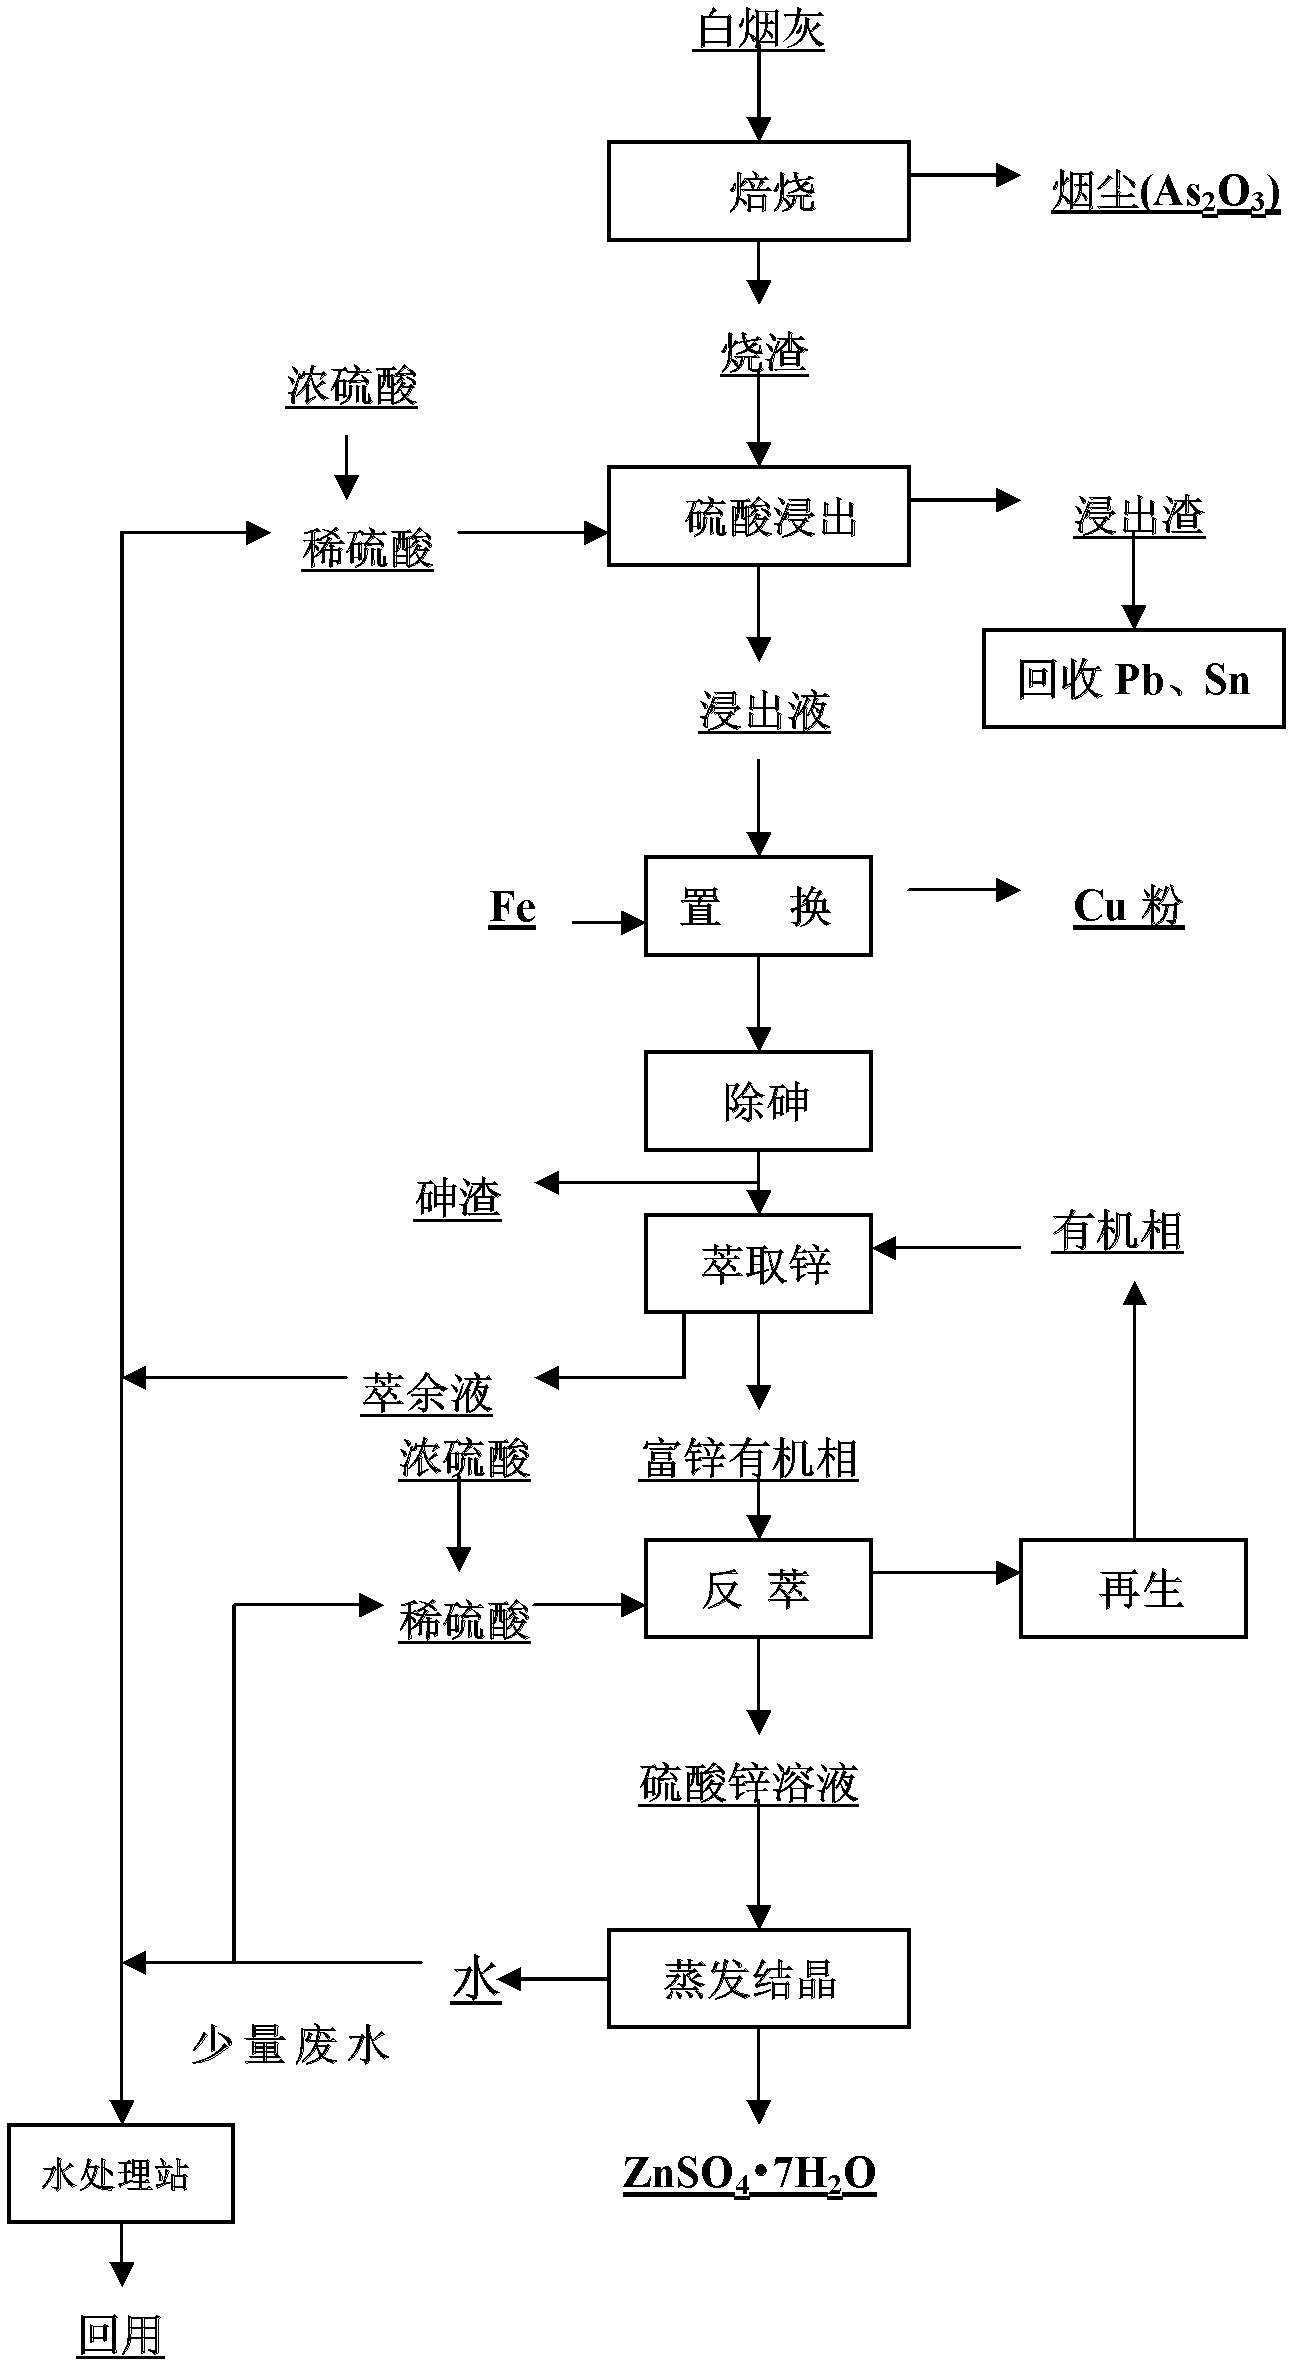 Method for comprehensively recovering valuable elements from high-arsenic-containing copper smelting soot